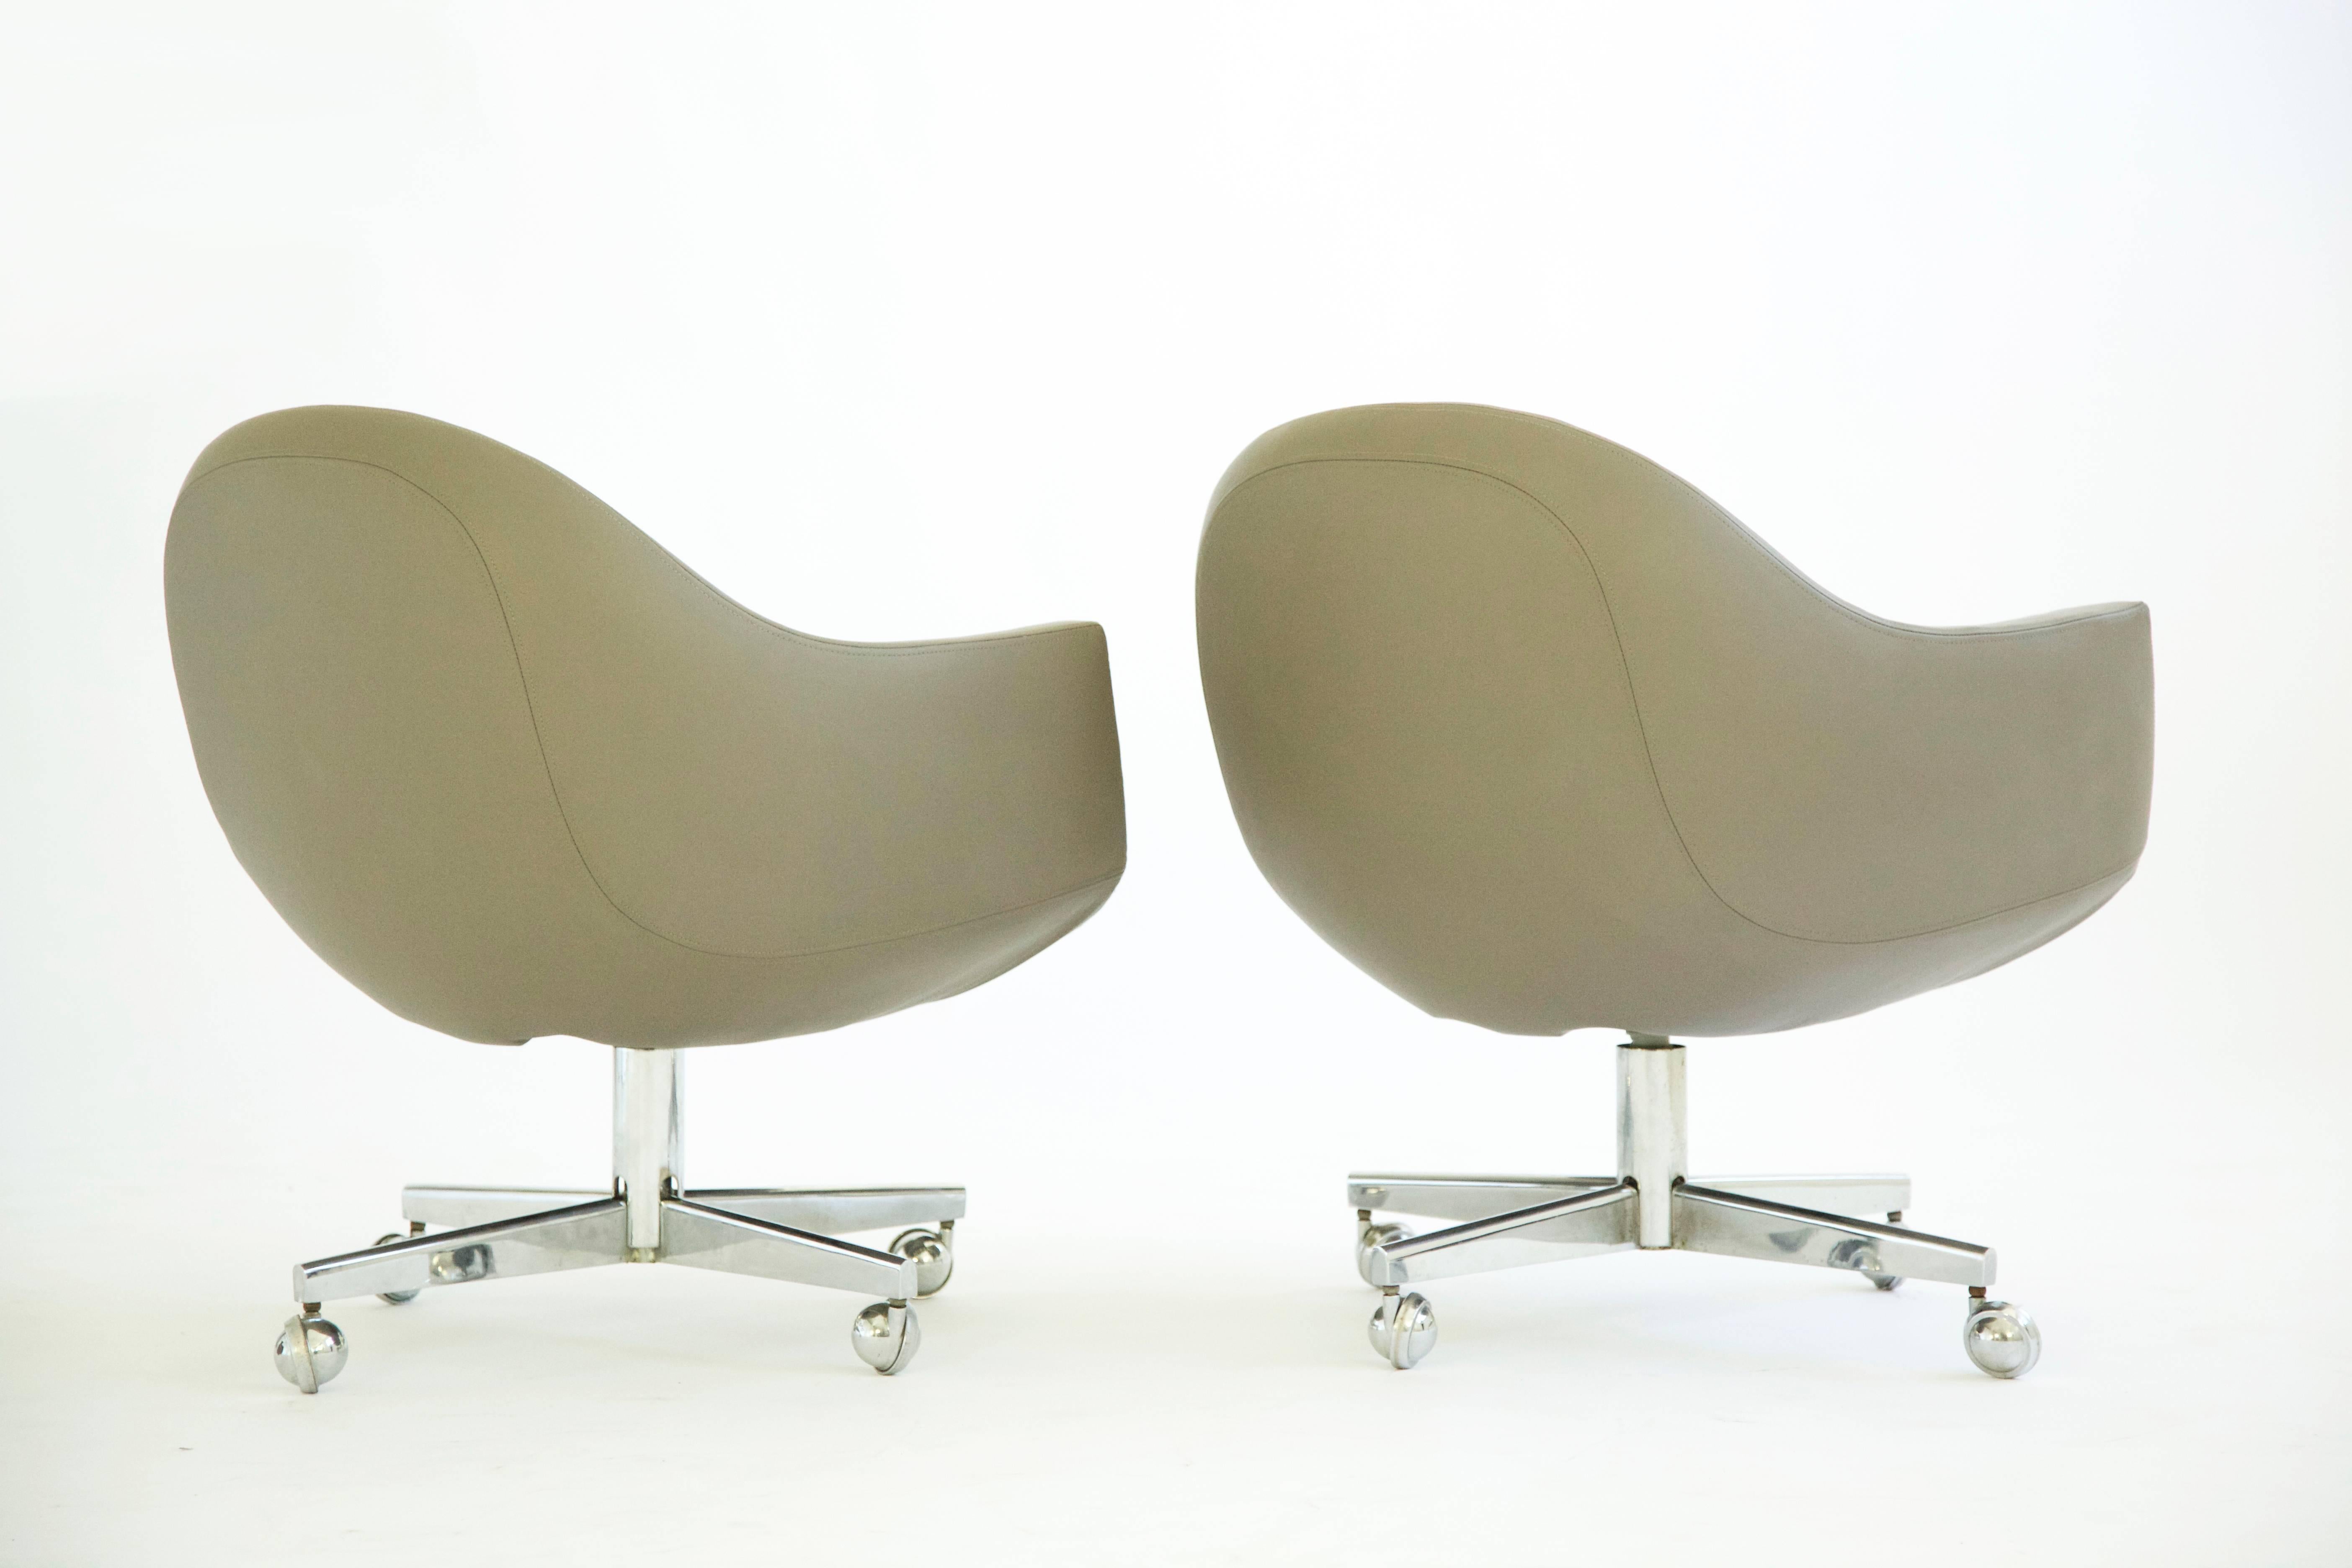 20th Century Pair of Leather Swivel Chairs in the Style of Milo Baughman